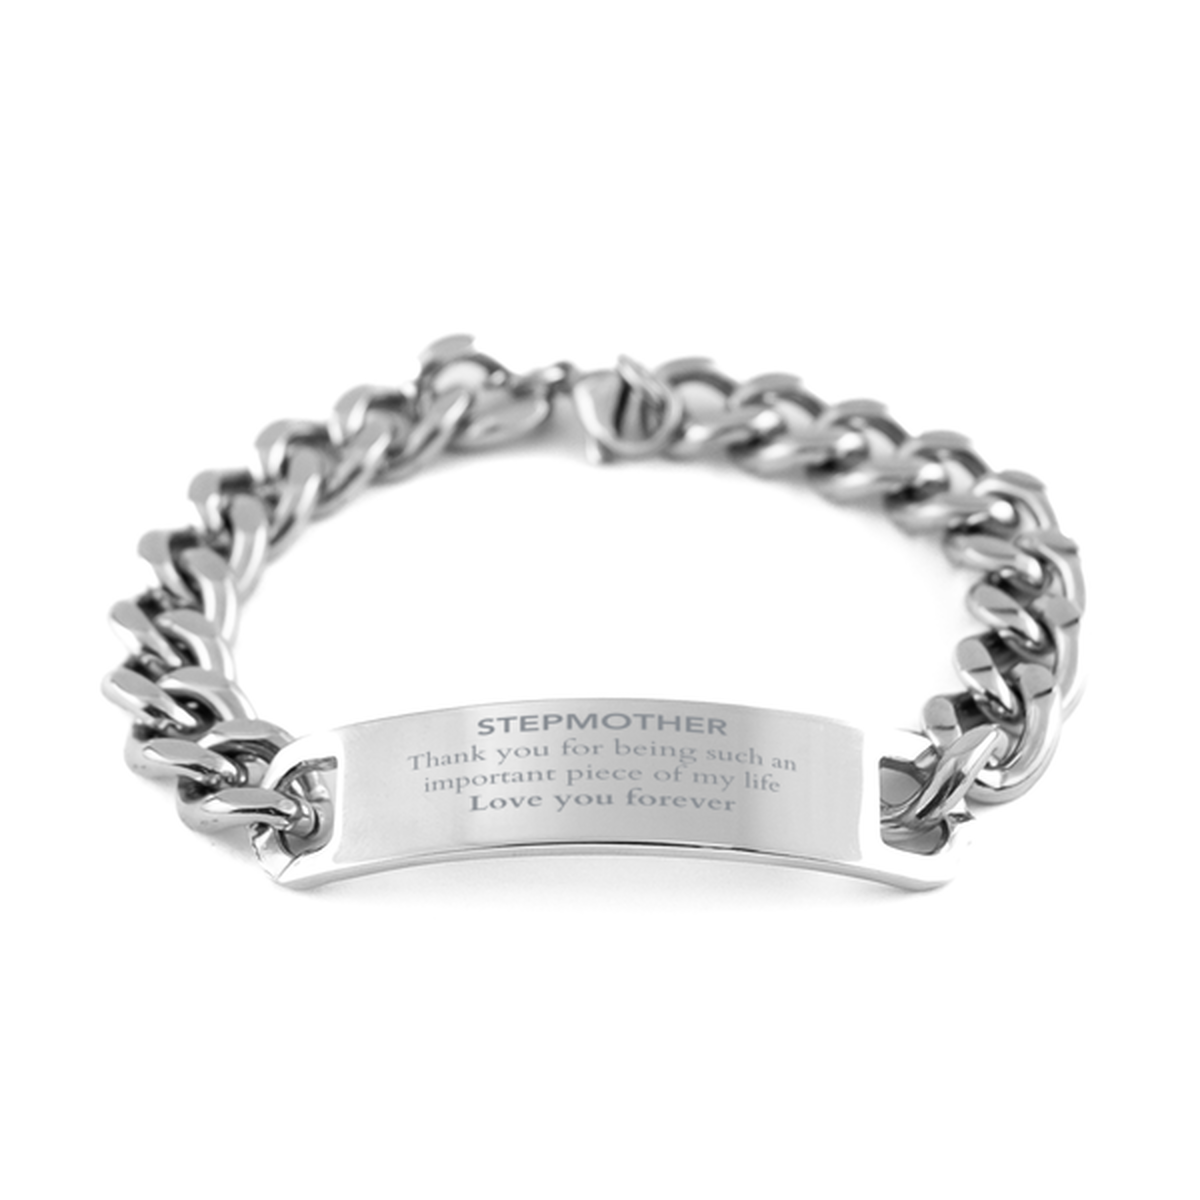 Appropriate Stepmother Cuban Chain Stainless Steel Bracelet Epic Birthday Gifts for Stepmother Thank you for being such an important piece of my life Stepmother Christmas Mothers Fathers Day